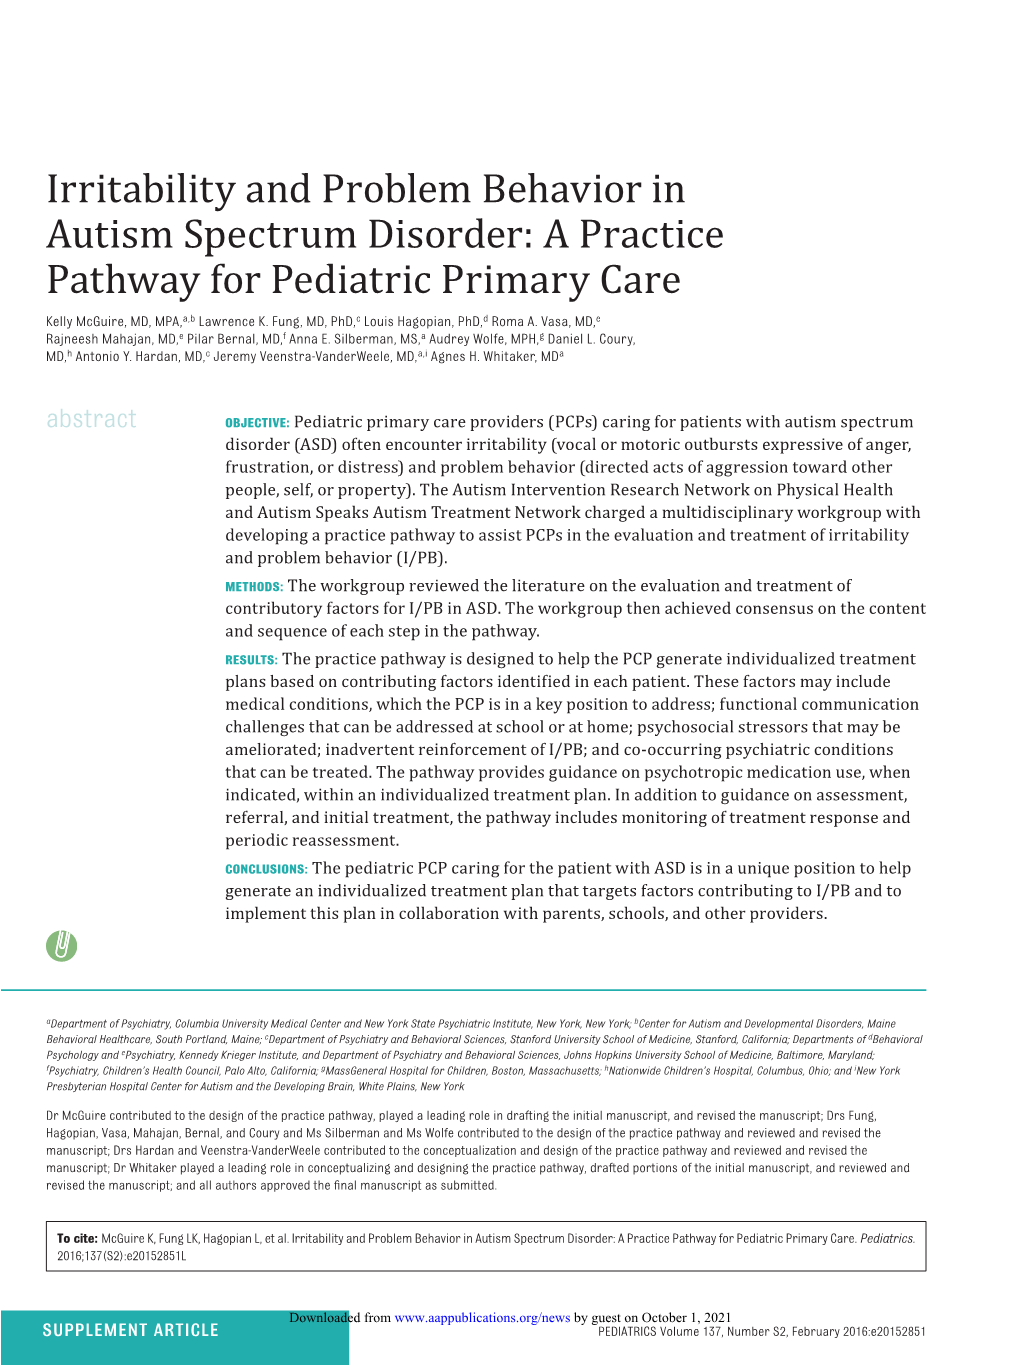 Irritability and Problem Behavior in Autism Spectrum Disorder: a Practice Pathway for Pediatric Primary Care Kelly Mcguire, MD, MPA,A,B Lawrence K